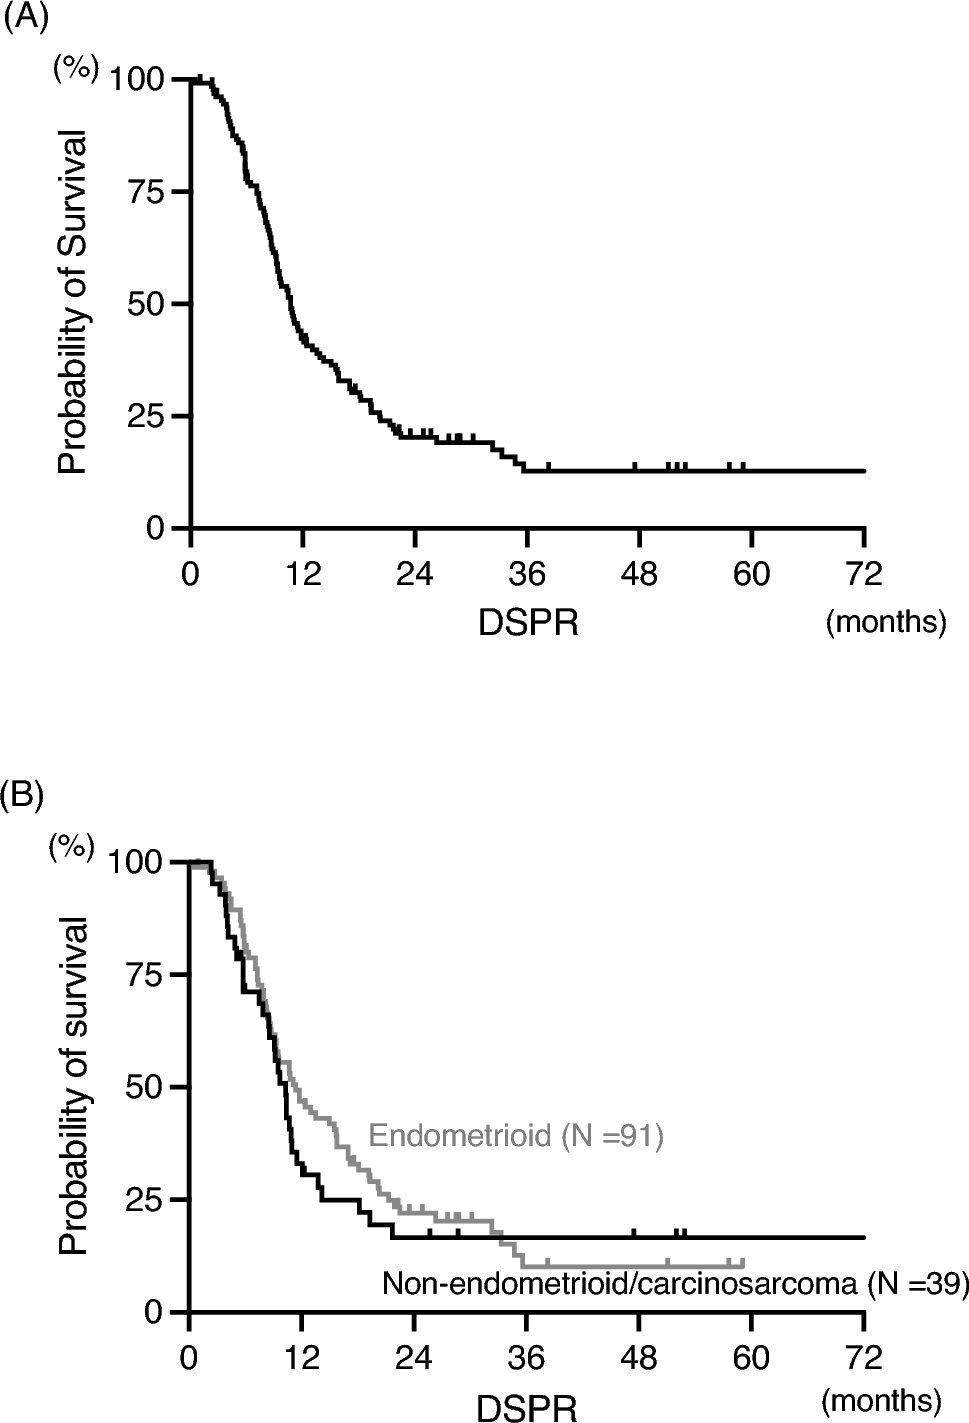 Re-administration of platinum-based chemotherapy for recurrent endometrial cancer: an ancillary analysis of the SGSG-012/GOTIC-004/Intergroup study